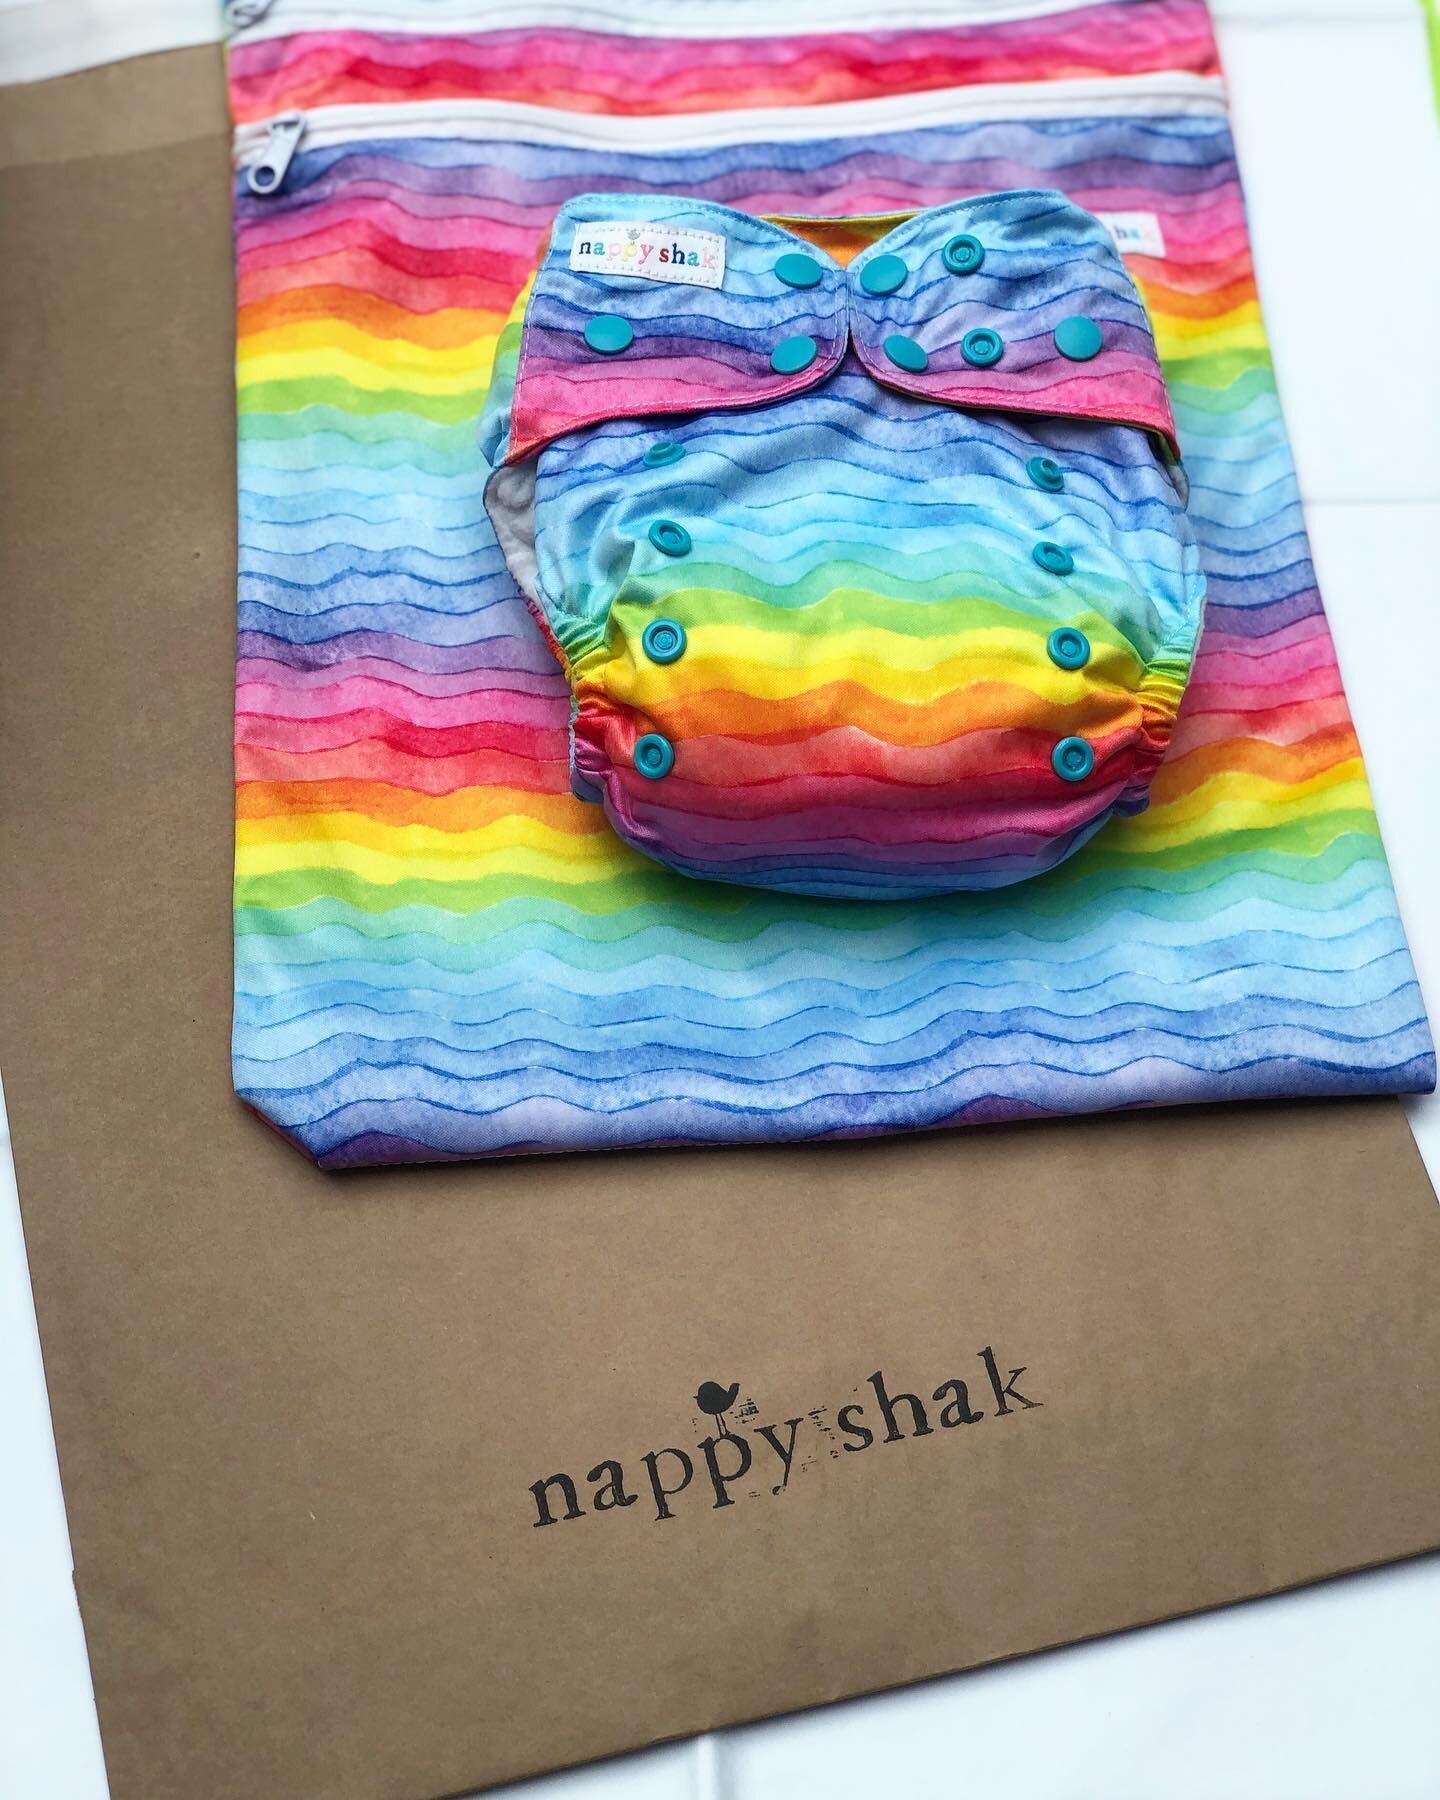 Starting the week (b)right with this gorgeous order. ✨

Featuring our lovely Sherbet nappy and wet bag. 🌈

#clothnappies #reusableclothnappies #nappies #newbaby #ecofriendly #babystuff #wetbag #reducewaste #choosetoreuse #sherbet #colourful #rainbow